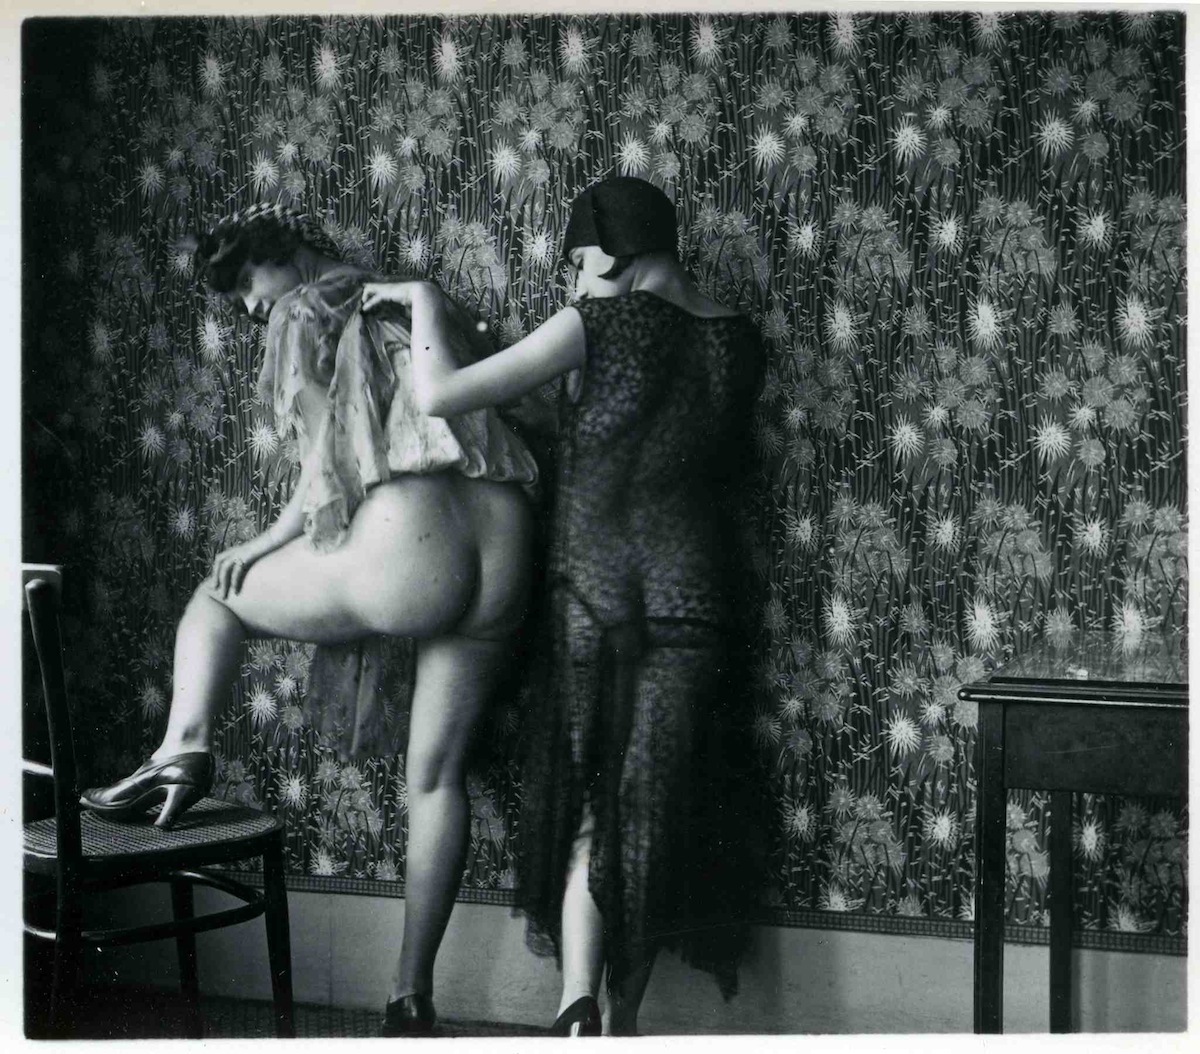 Charming Pornographic Photographs of French Prostitutes from the 1930s